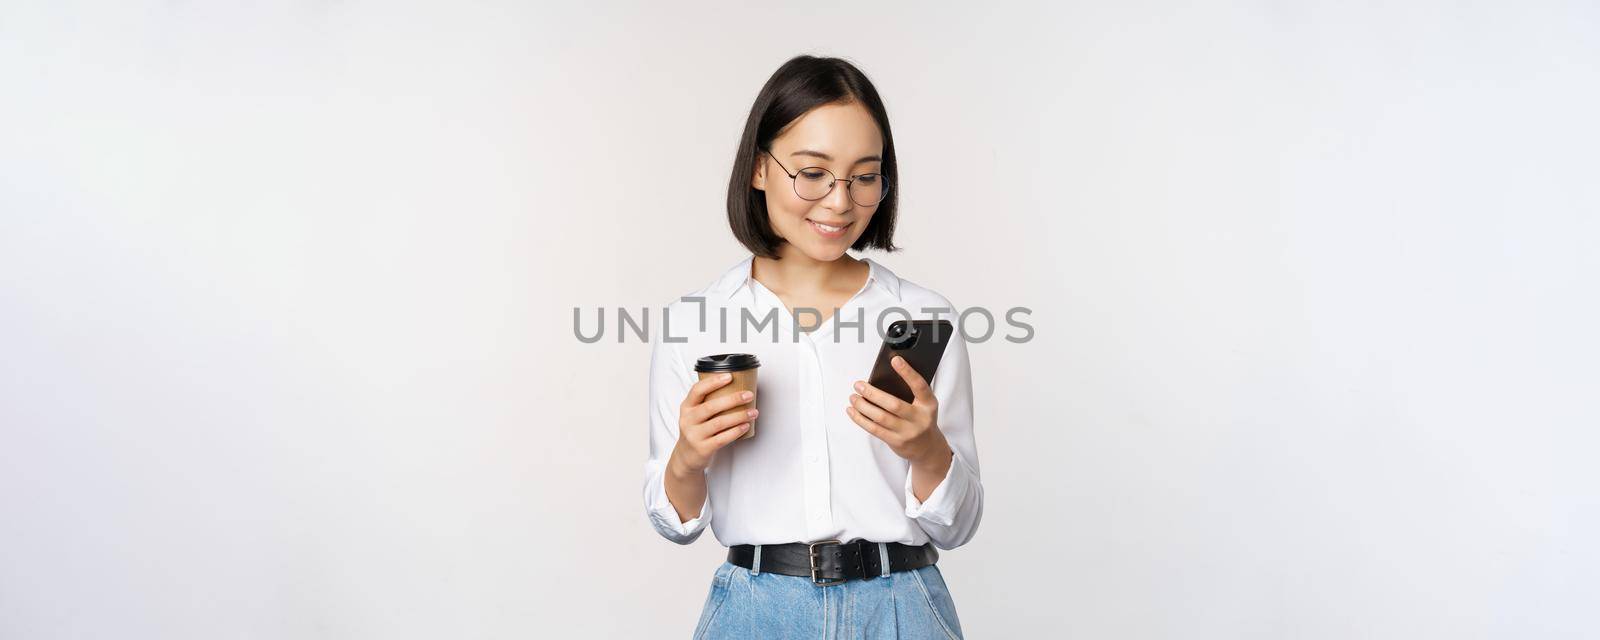 Image of modern asian woman looking at mobile phone, drinking takeaway coffee, wearing glasses, using smartphone app, standing over white background.